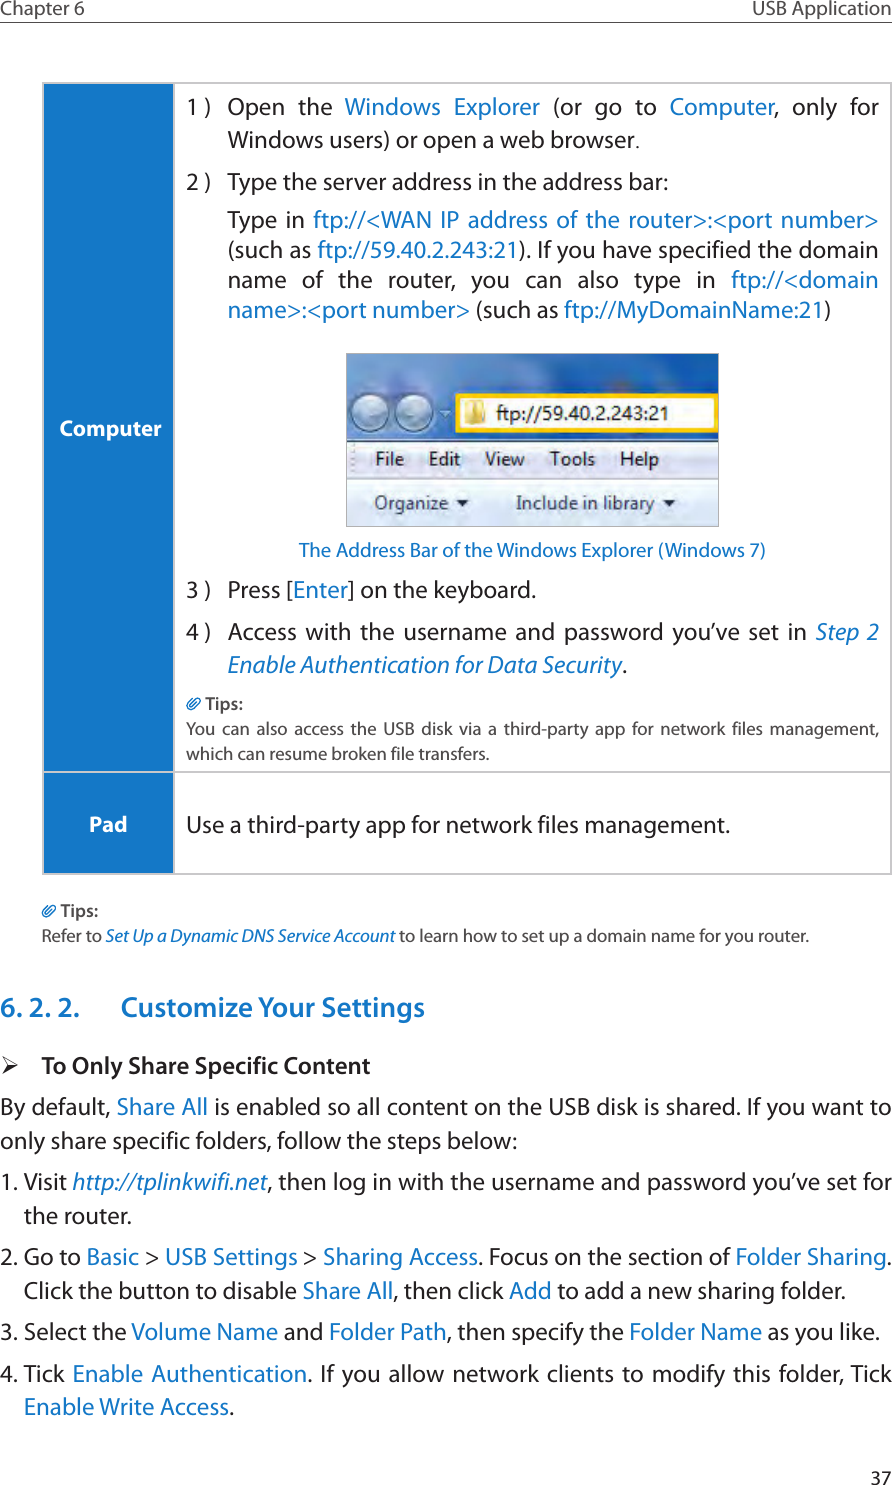 37Chapter 6 USB Application Computer1 )  Open the Windows Explorer (or go to Computer, only for Windows users) or open a web browser.2 )  Type the server address in the address bar:Type in ftp://&lt;WAN IP address of the router&gt;:&lt;port number&gt; (such as ftp://59.40.2.243:21). If you have specified the domain name of the router, you can also type in ftp://&lt;domain name&gt;:&lt;port number&gt; (such as ftp://MyDomainName:21)The Address Bar of the Windows Explorer (Windows 7)3 )  Press [Enter] on the keyboard.4 )  Access with the username and password you’ve set in Step 2 Enable Authentication for Data Security.Tips:You can also access the USB disk via a third-party app for network files management, which can resume broken file transfers. Pad Use a third-party app for network files management.Tips:Refer to Set Up a Dynamic DNS Service Account to learn how to set up a domain name for you router.6. 2. 2.  Customize Your Settings ¾To Only Share Specific ContentBy default, Share All is enabled so all content on the USB disk is shared. If you want to only share specific folders, follow the steps below:1. Visit http://tplinkwifi.net, then log in with the username and password you’ve set for the router.2. Go to Basic &gt; USB Settings &gt; Sharing Access. Focus on the section of Folder Sharing. Click the button to disable Share All, then click Add to add a new sharing folder.3. Select the Volume Name and Folder Path, then specify the Folder Name as you like.4. Tick Enable Authentication. If you allow network clients to modify this folder, Tick Enable Write Access.